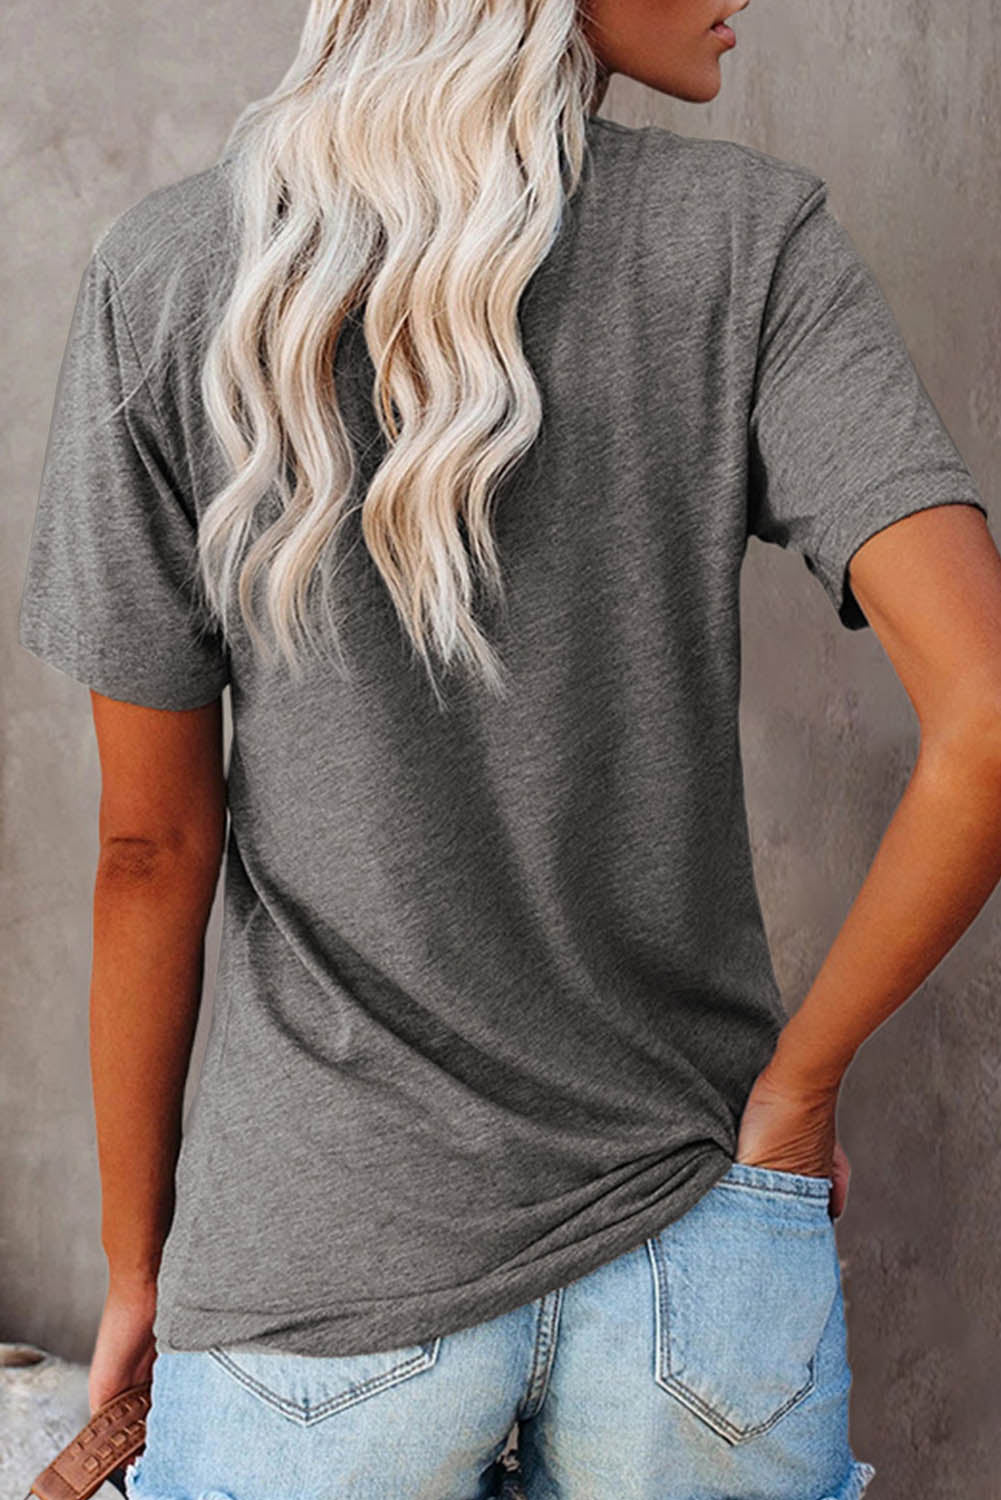 Gray Leopard Heart Be Kind Graphic Tee